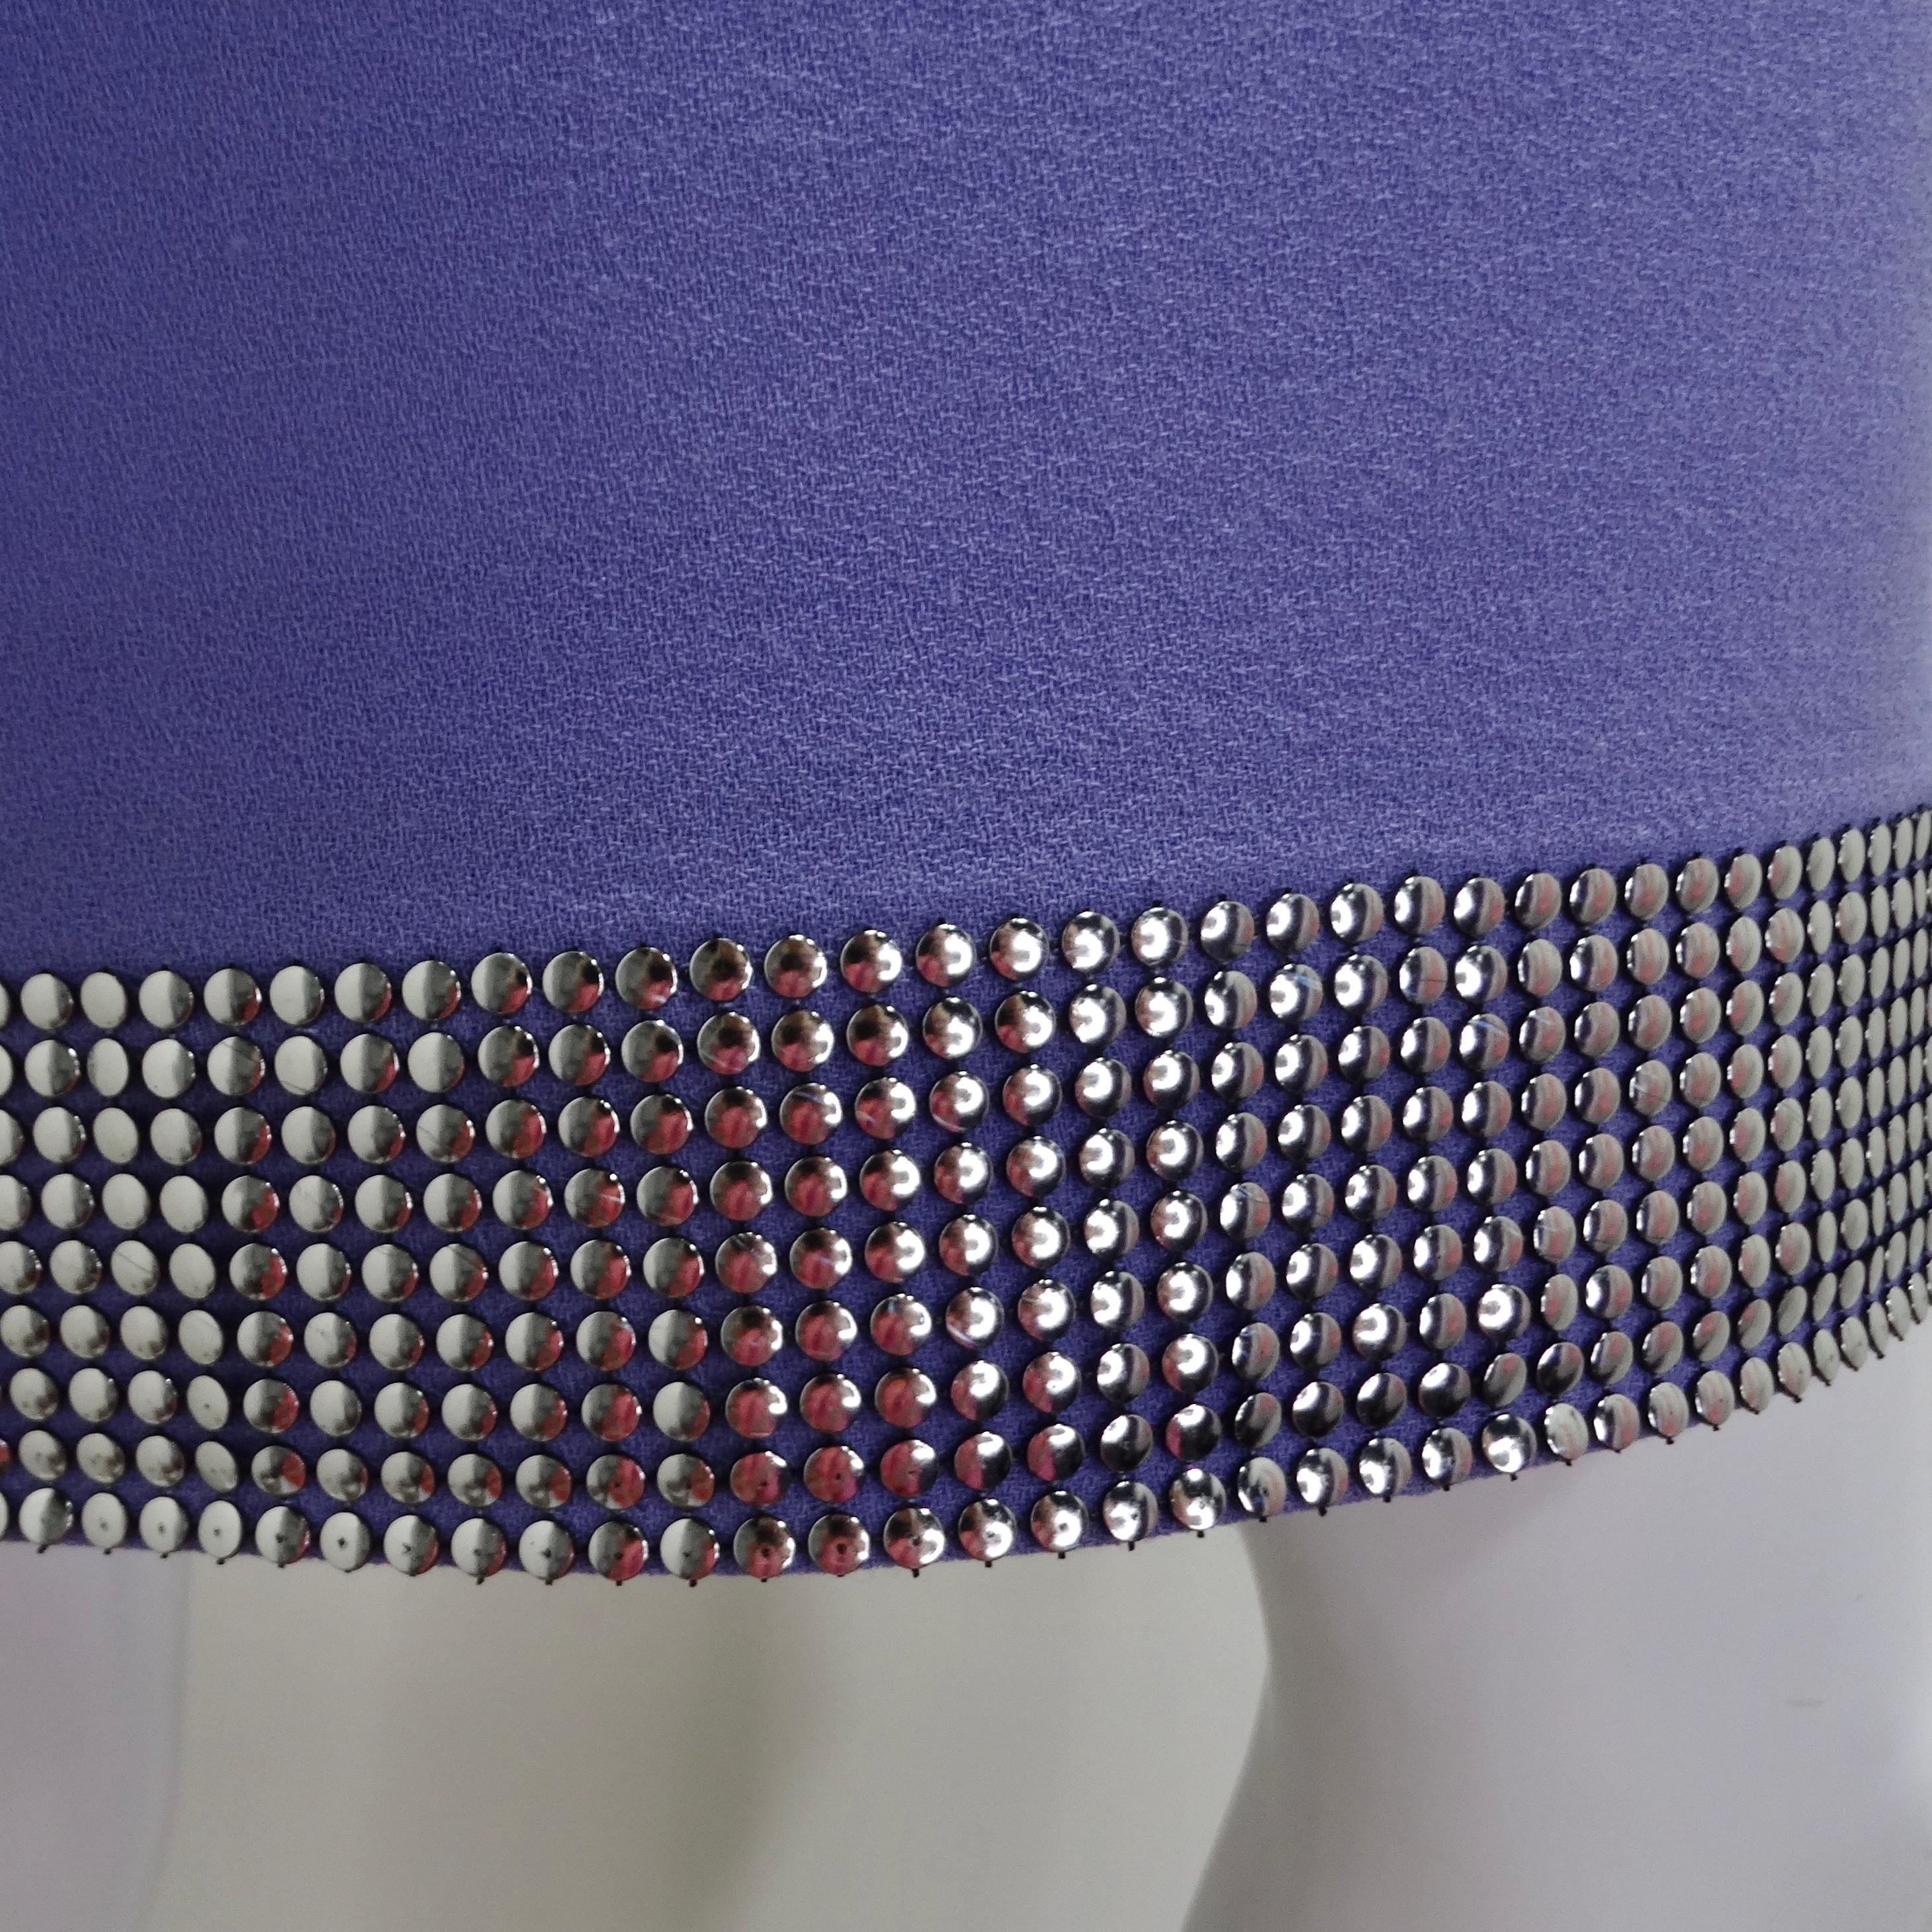 Pierre Cardin Lavender Studded Dress In Excellent Condition For Sale In Scottsdale, AZ